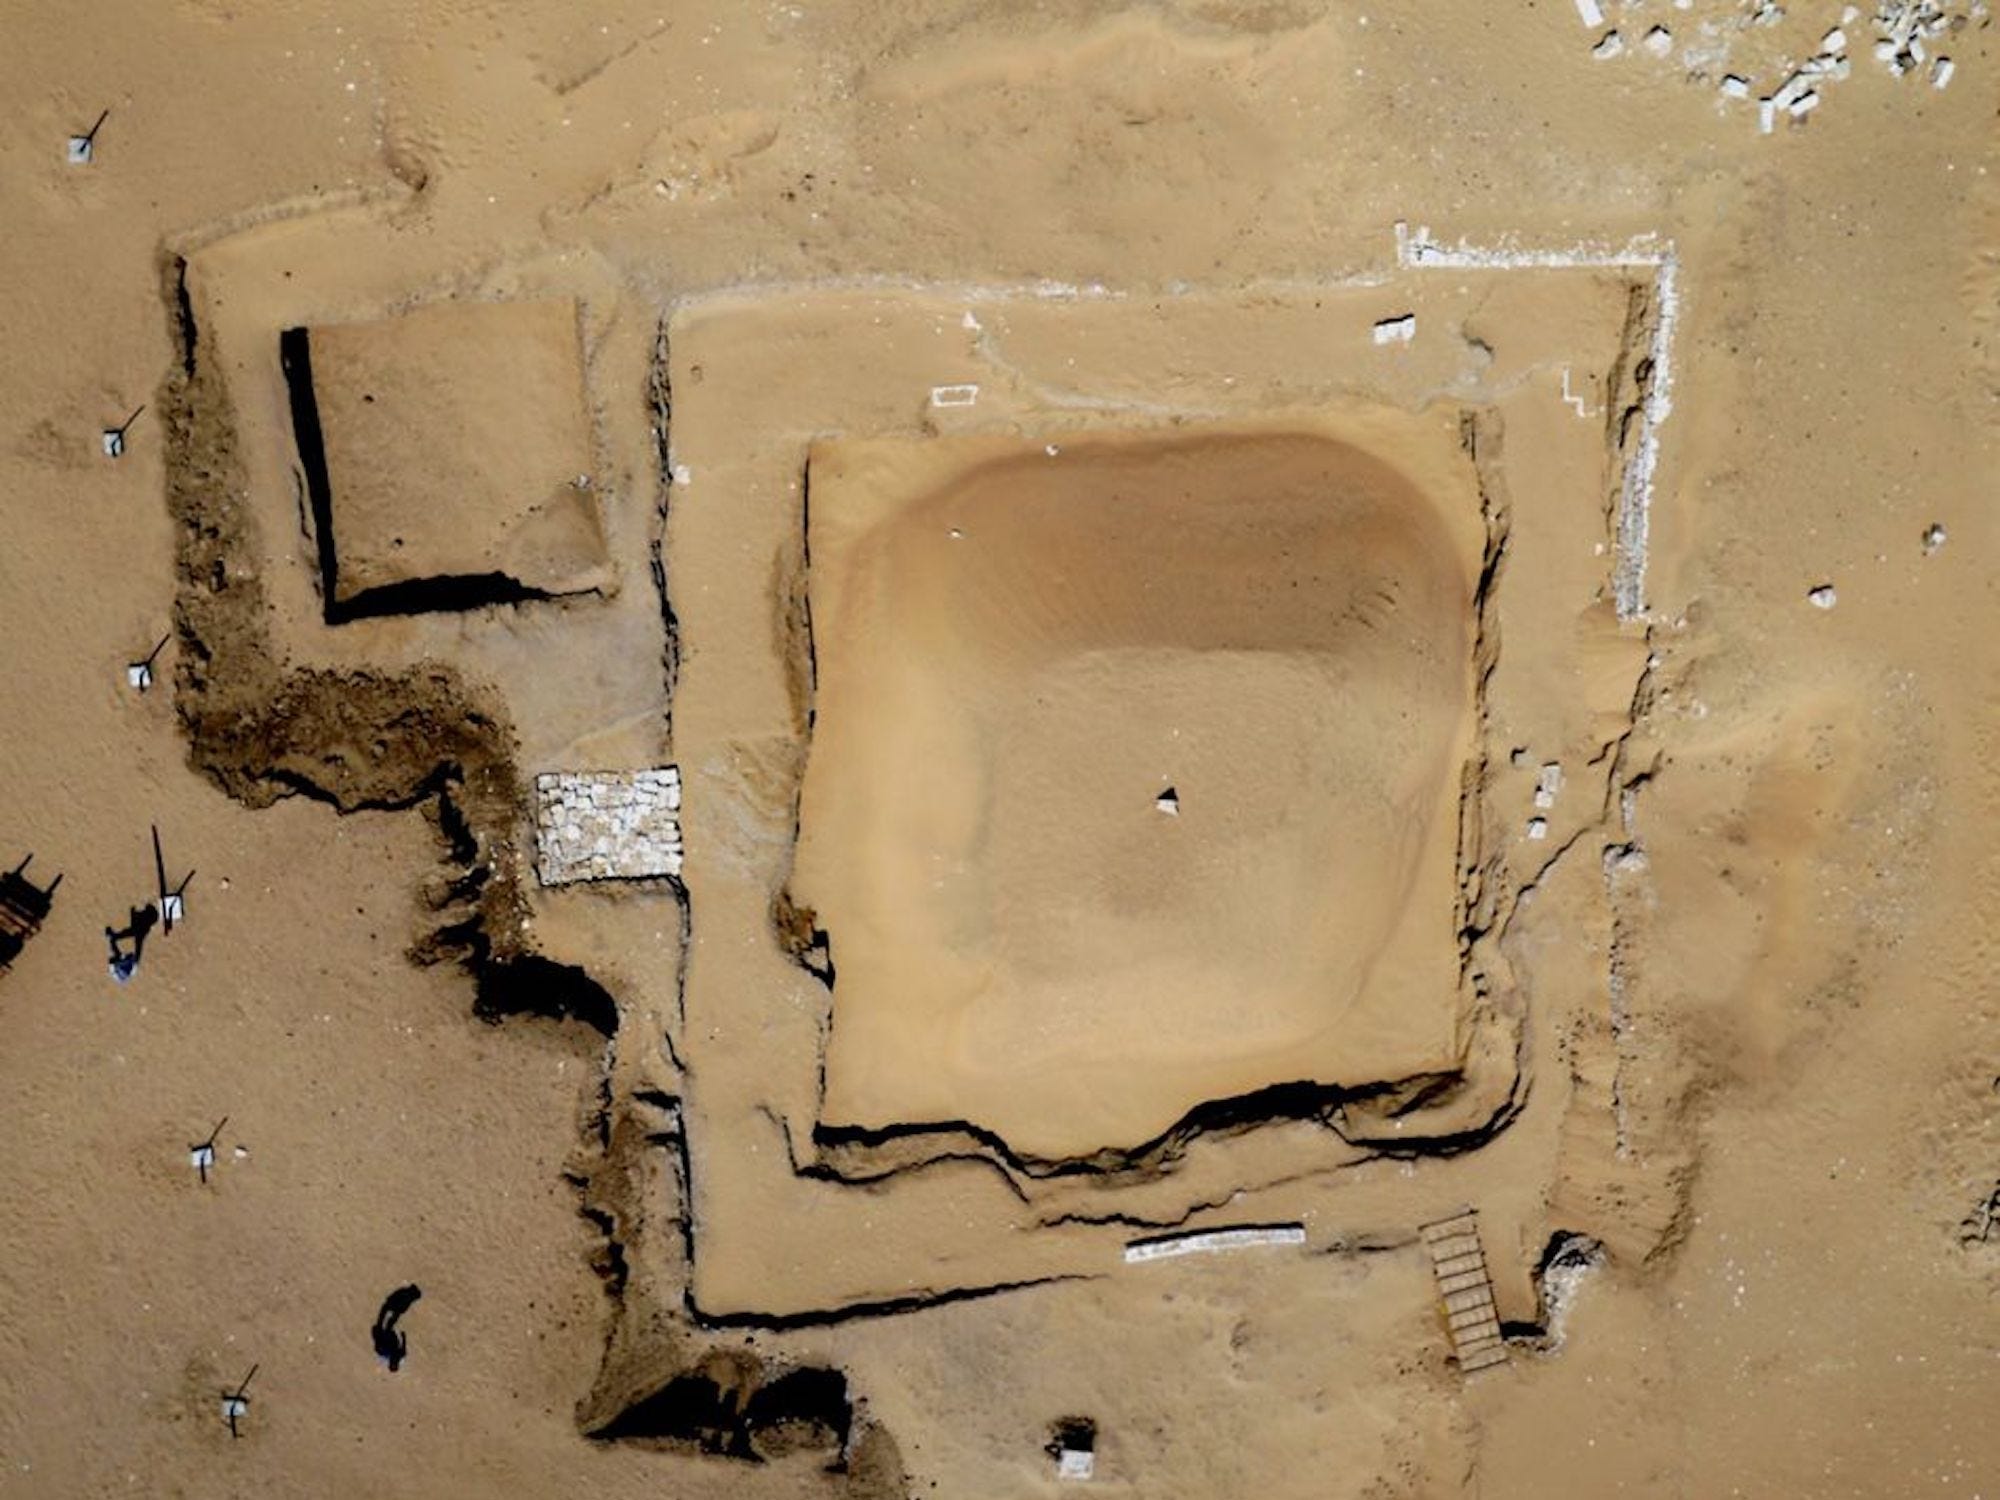 An aerial view of the site shows the embalming shaft next to the bigger tomb, the later still being covered